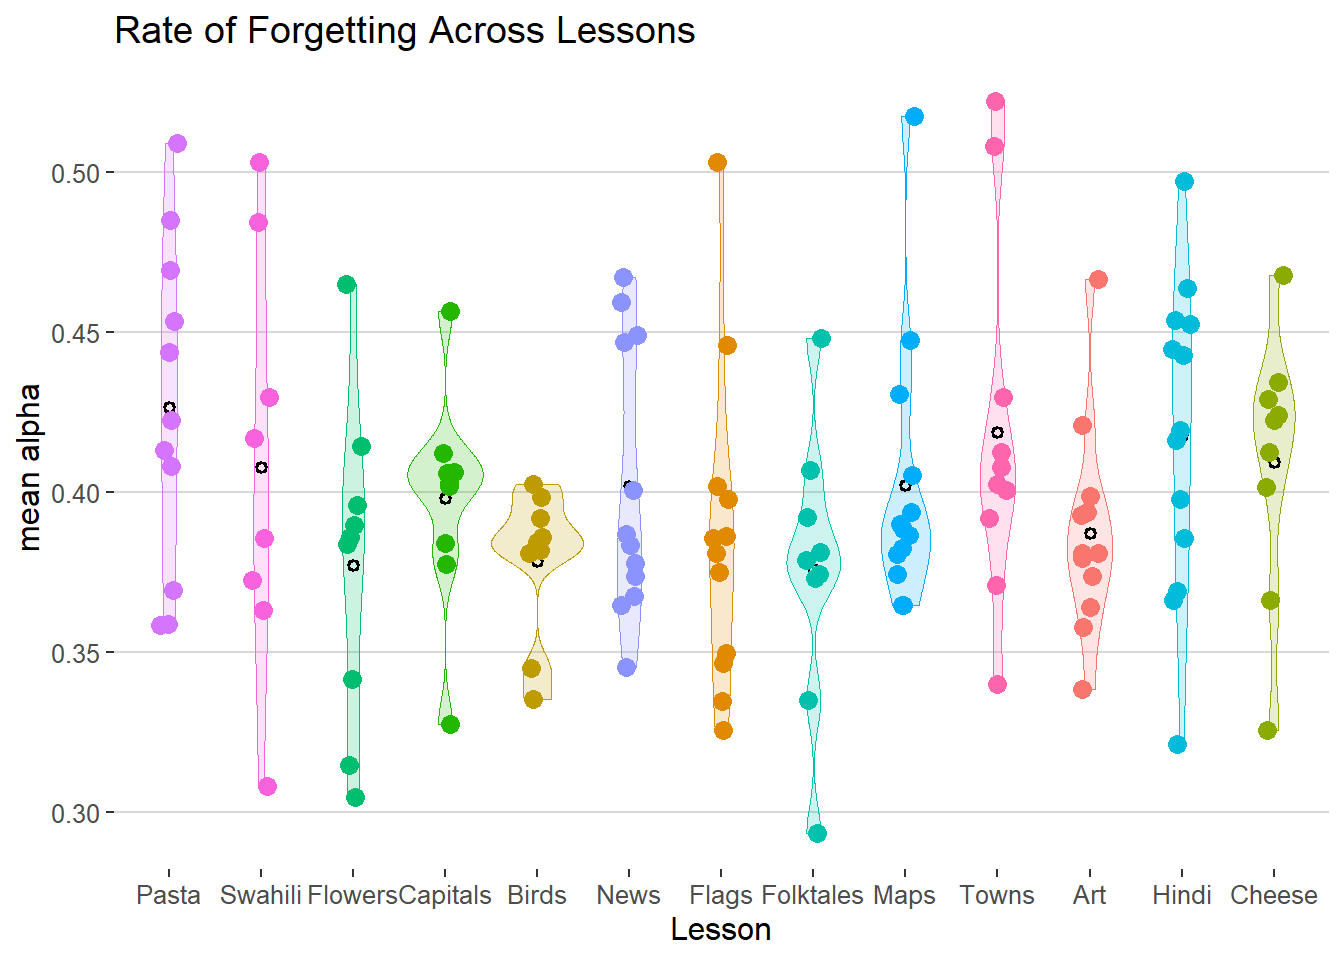 Rate of Forgetting Across Lessons